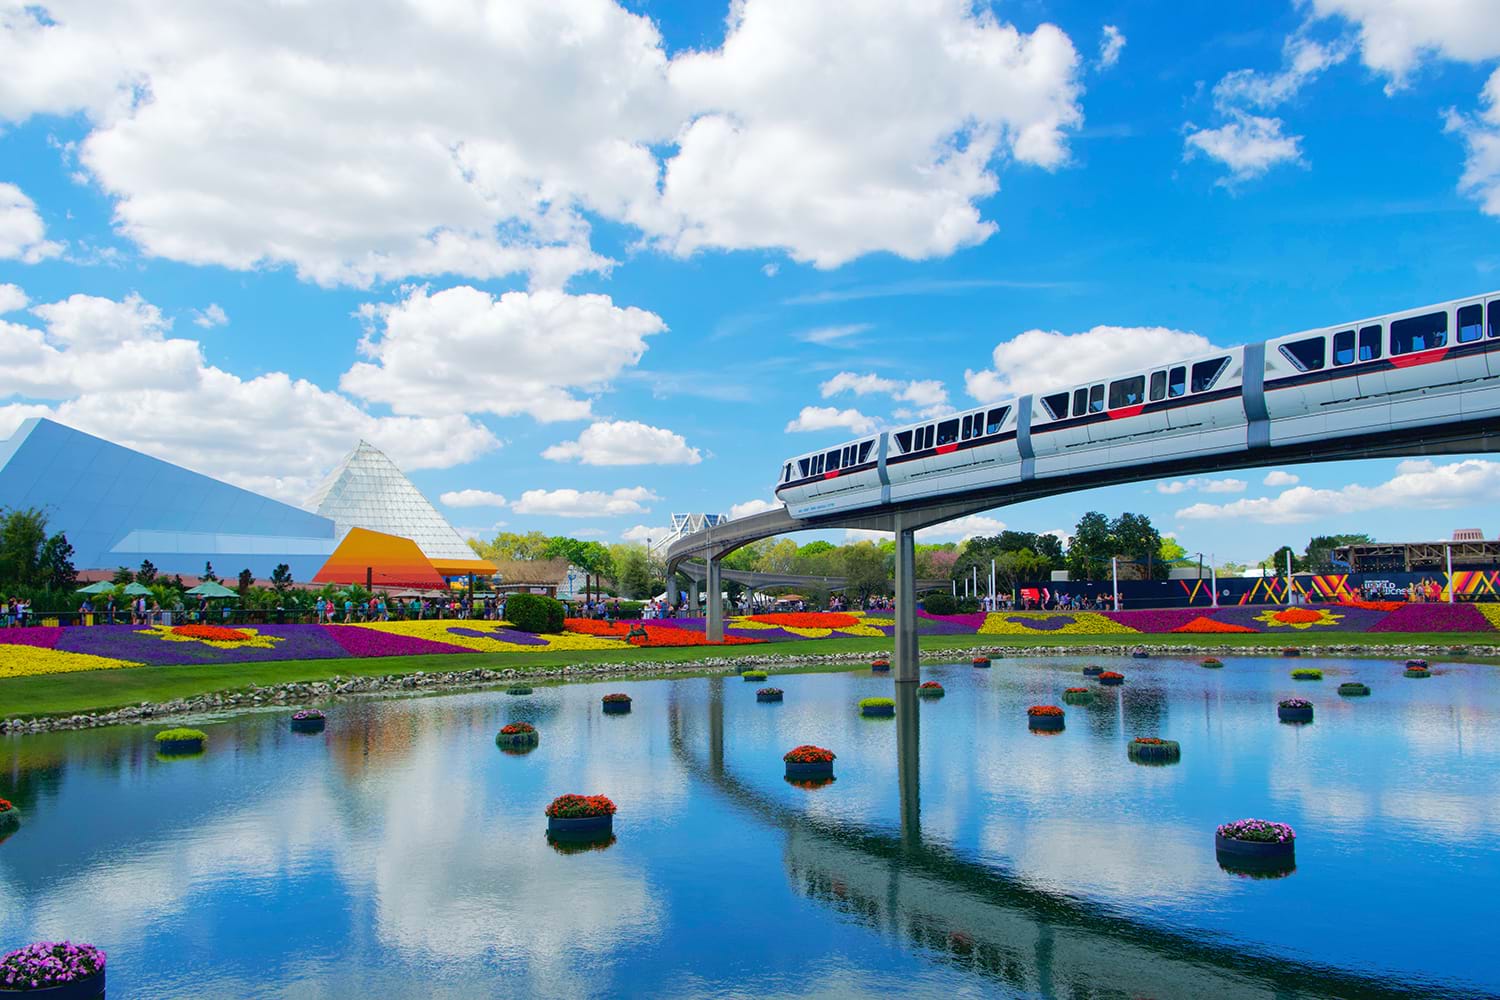 Disney World monorail over the park